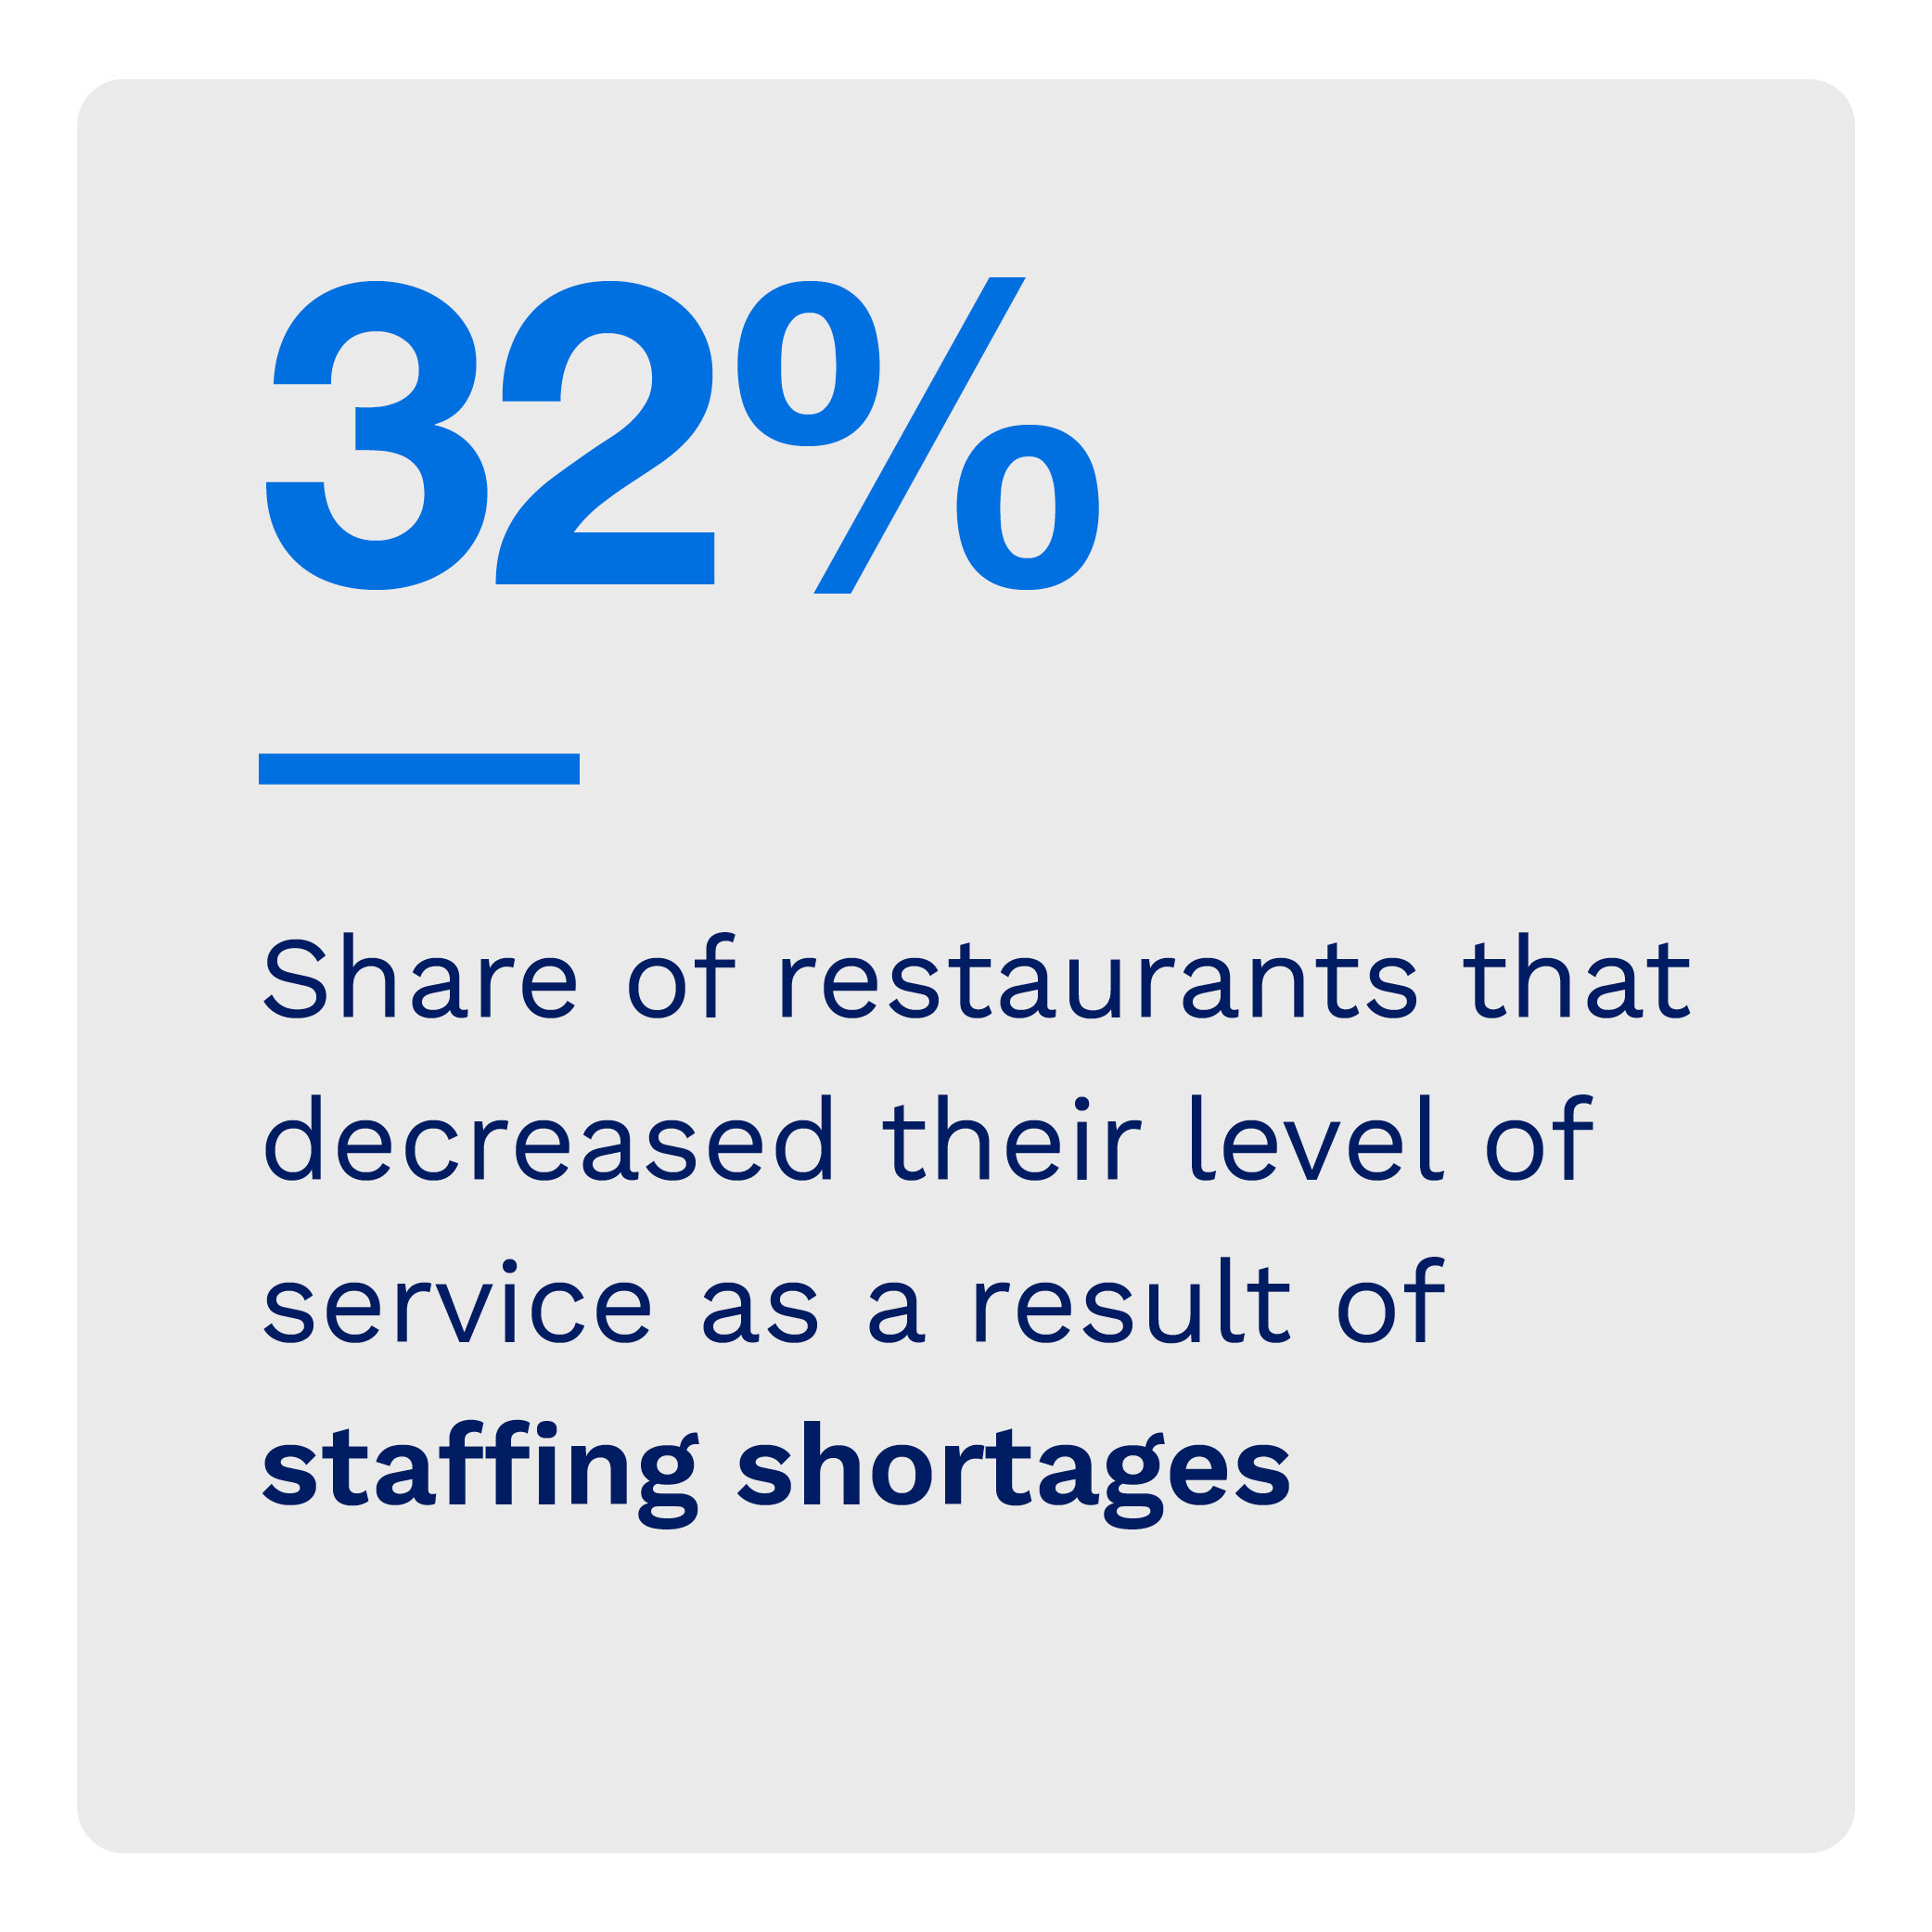 32%: Share of restaurants that decreased their level of service as a result of staffing shortages